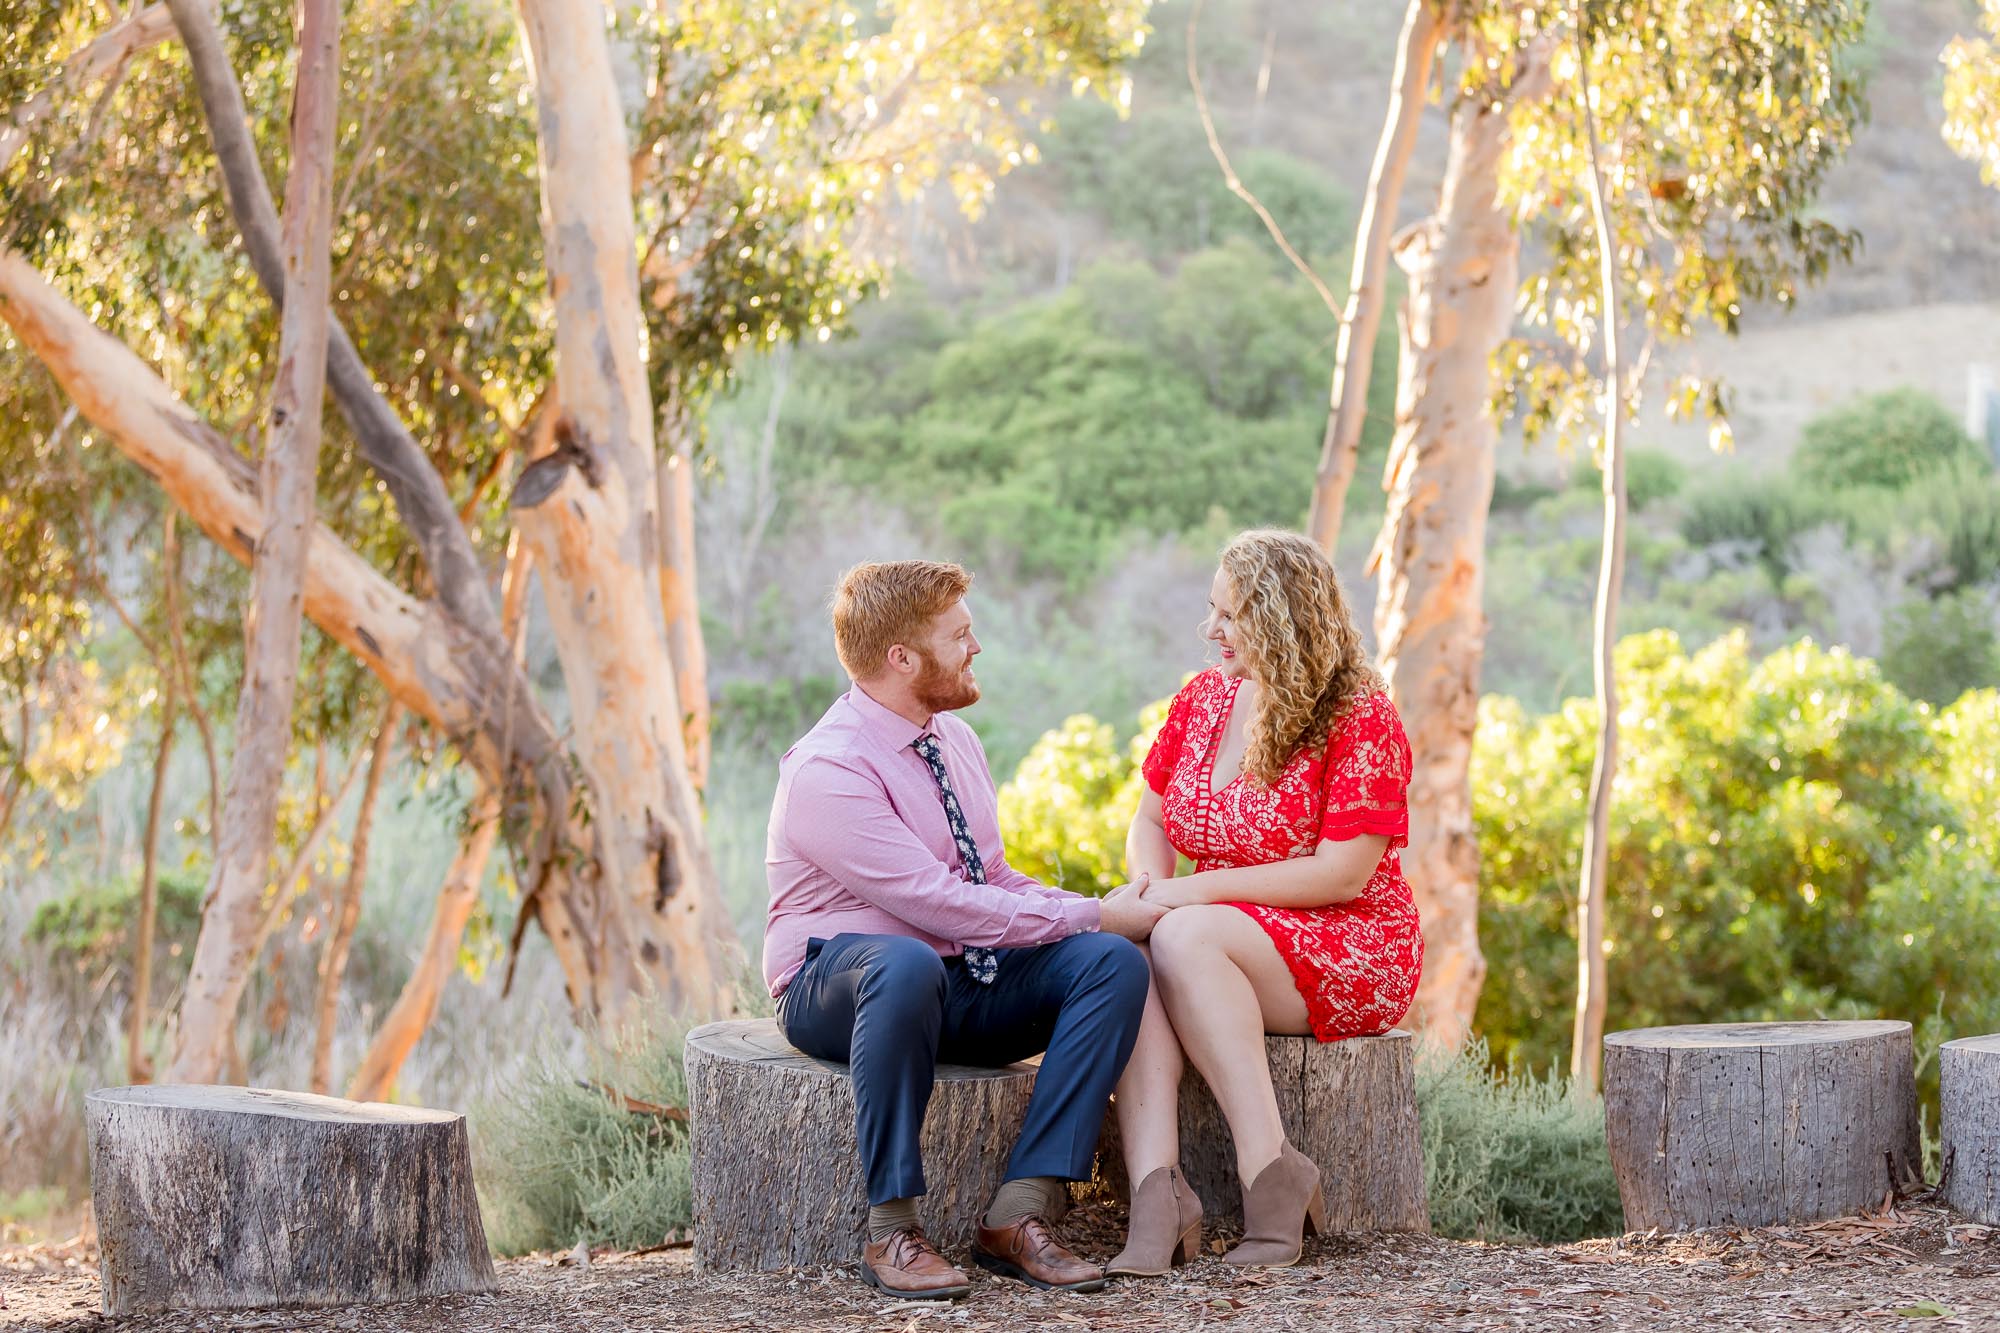 Tierney_Gregory_Batiquitos_Lagoon_Engagement_Session_071.jpg